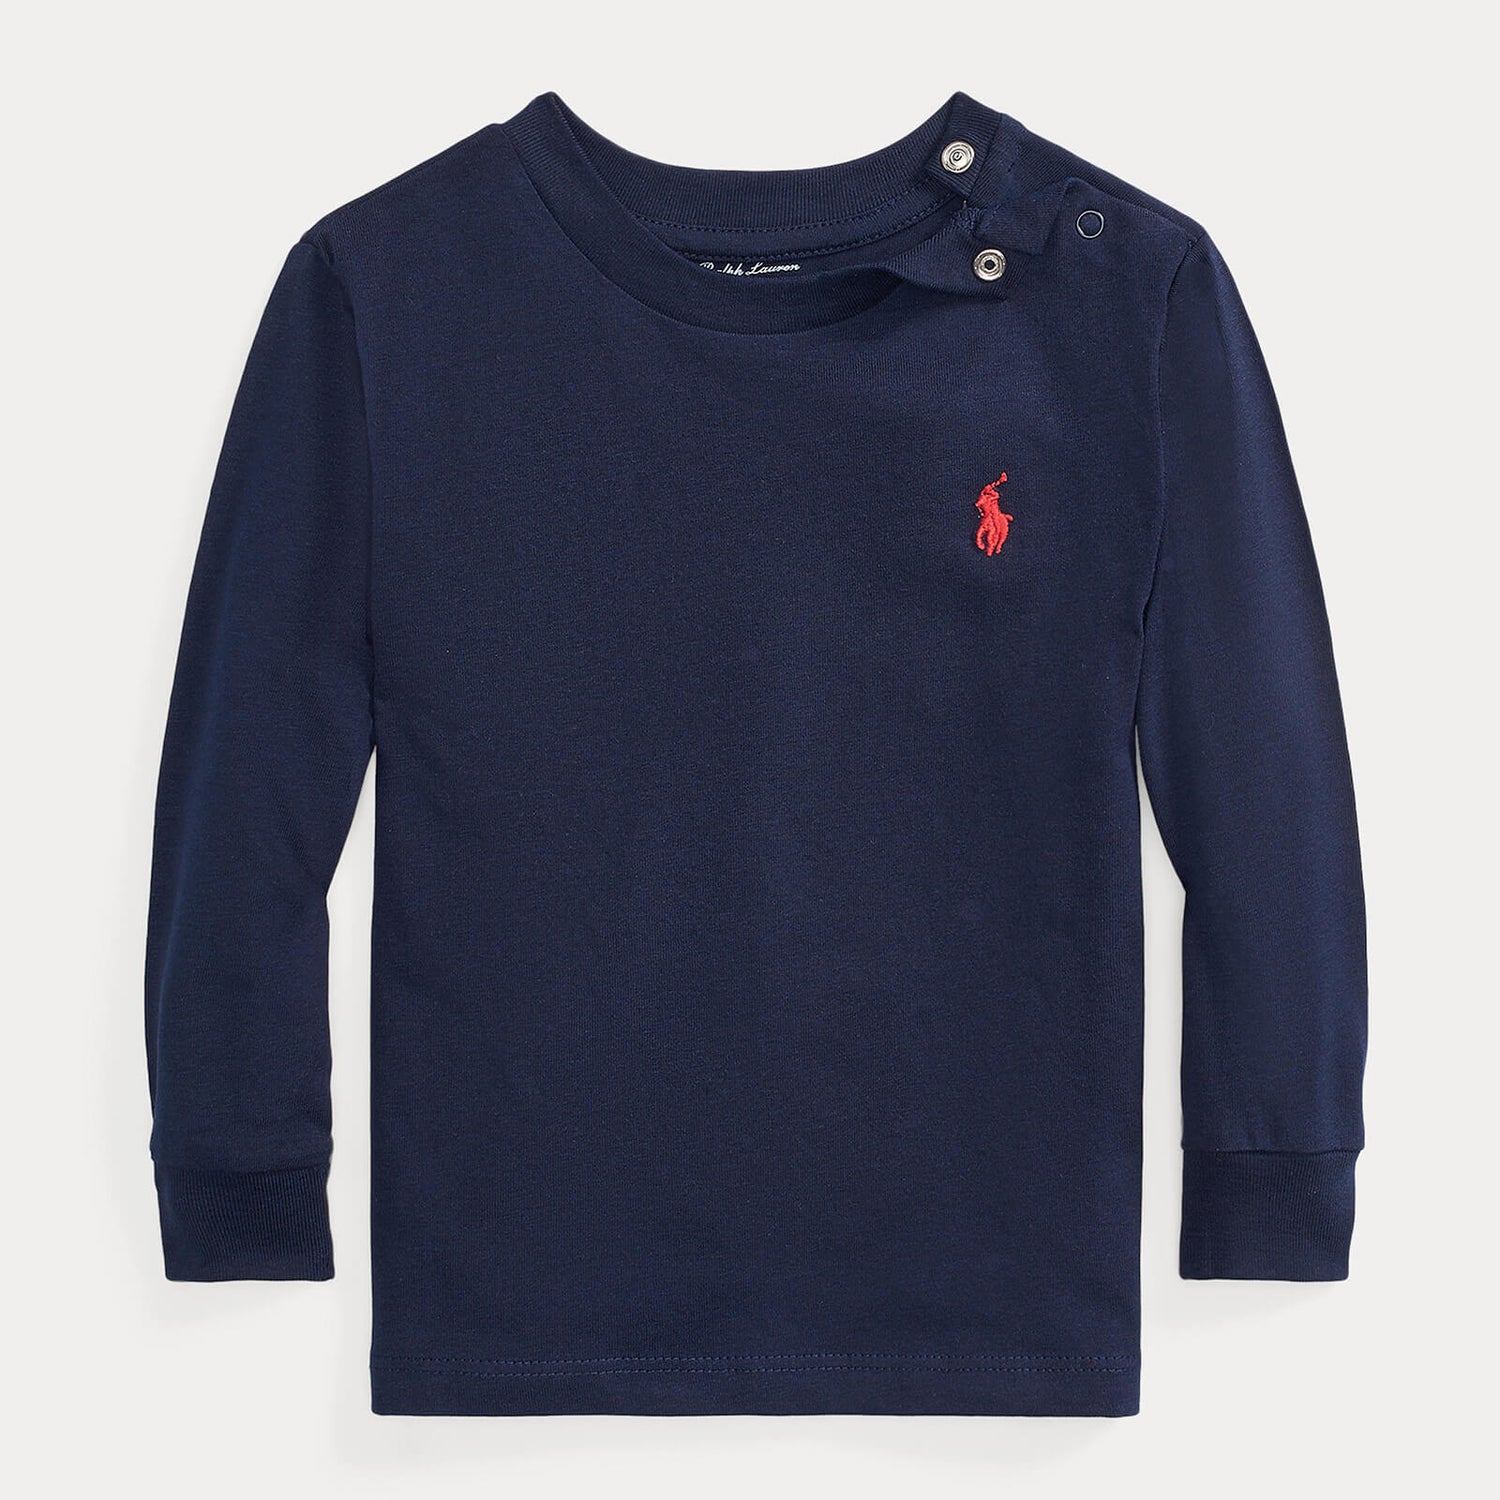 Polo Ralph Lauren Baby Long Sleeved Top - Cruise Navy - 6 Months